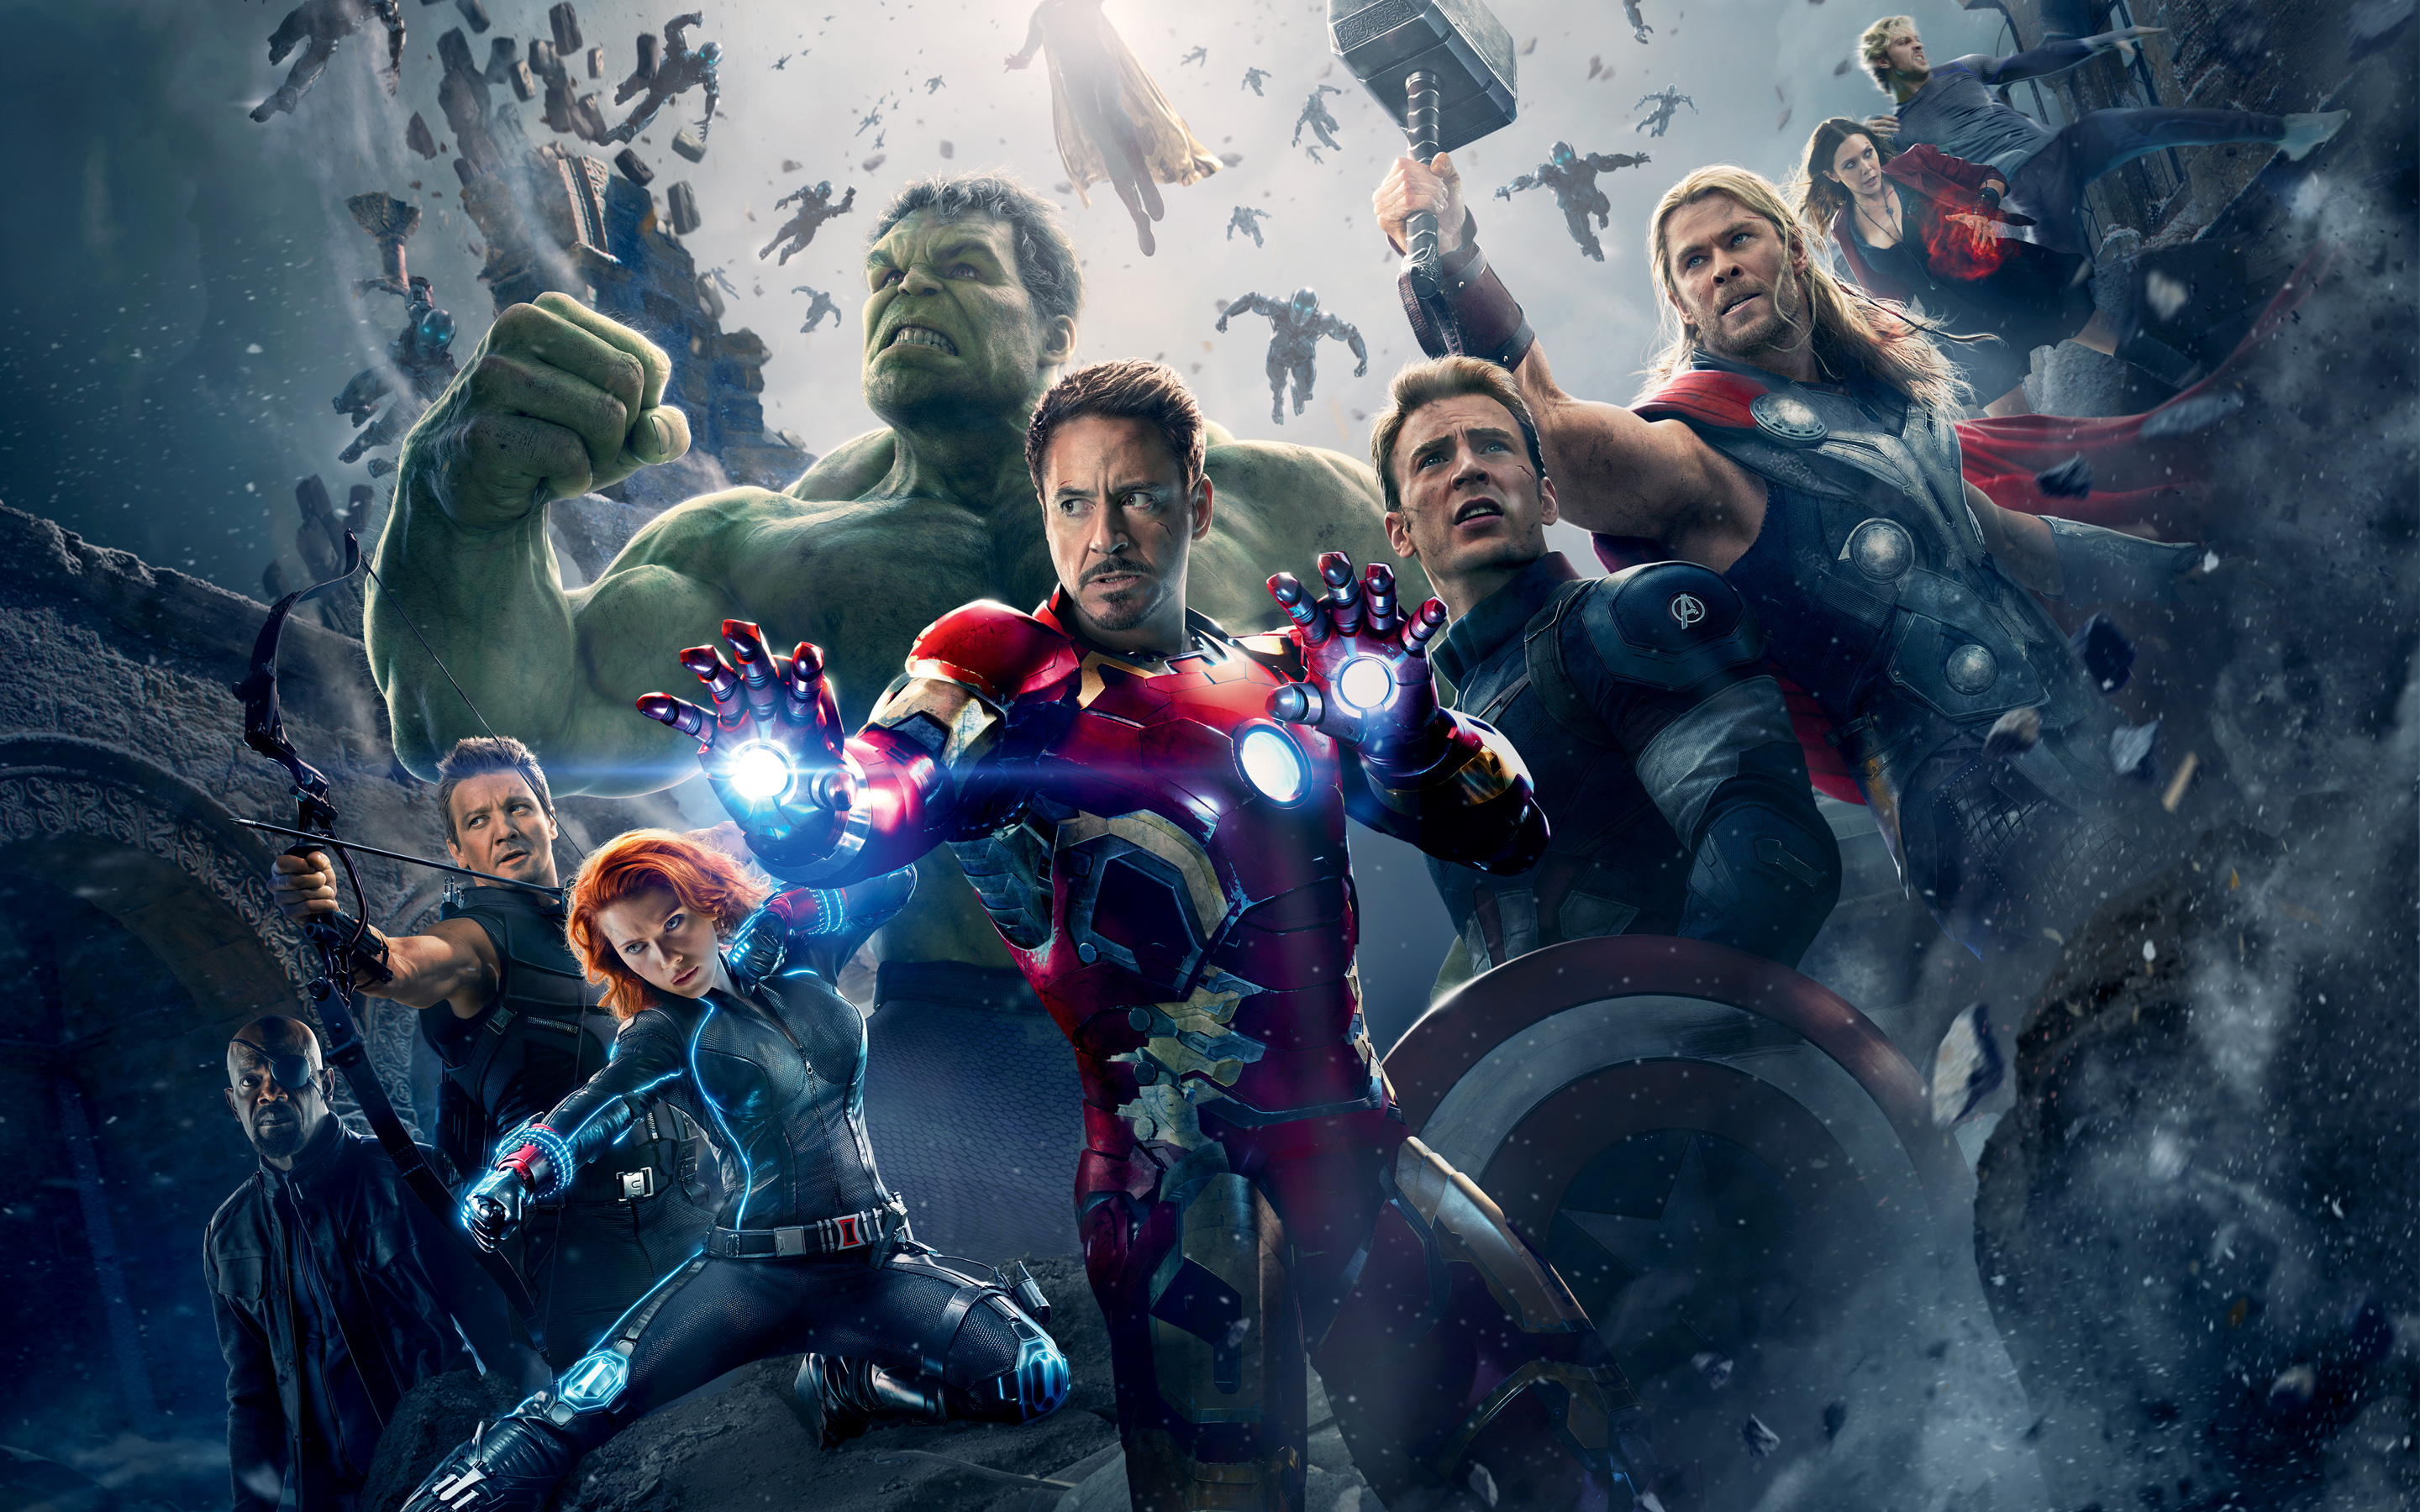  in http www hdwallpapers in avengers age of ultron wallpapers html